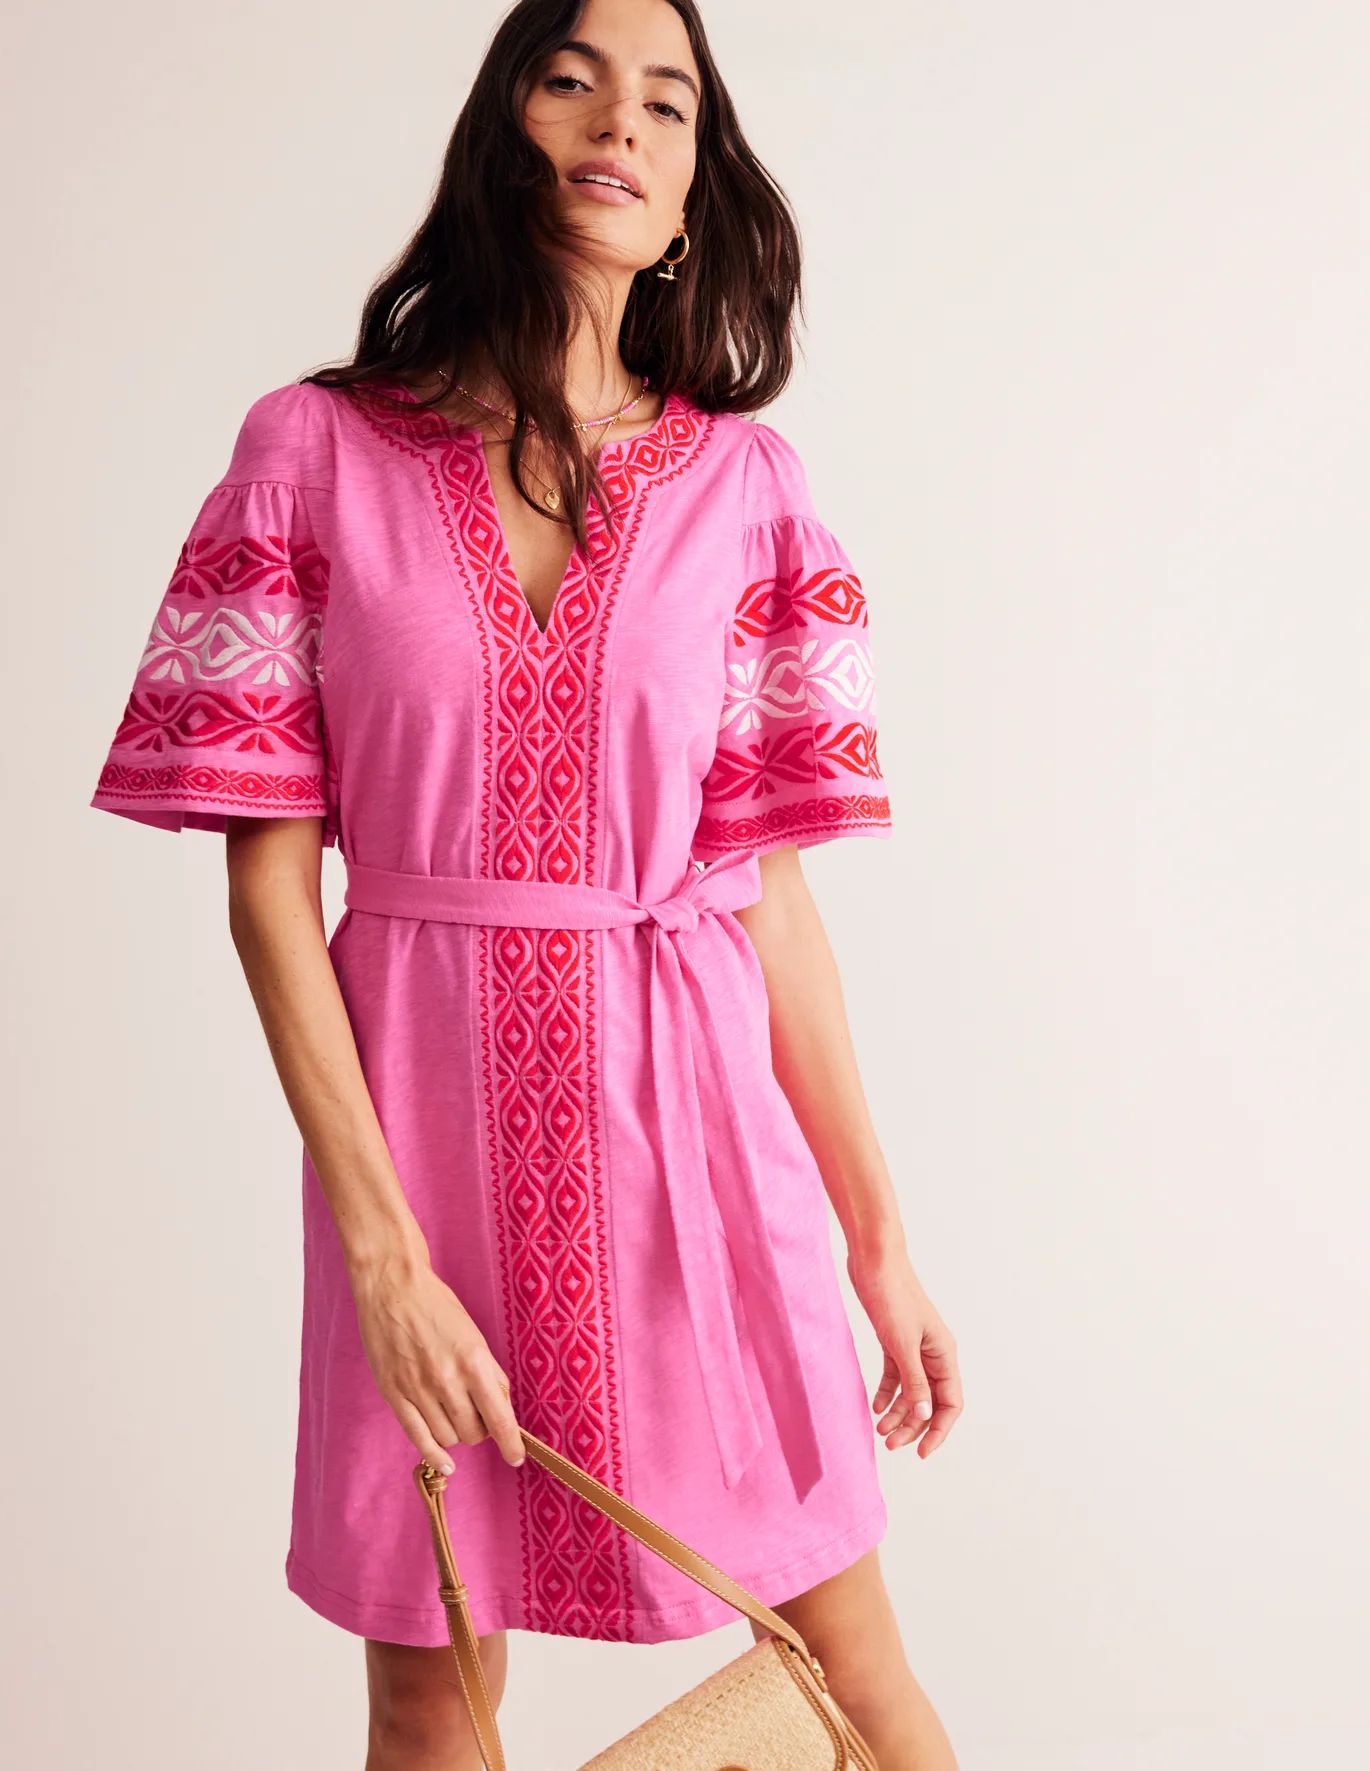 Embroidered Jersey Short Dress | Boden (US)